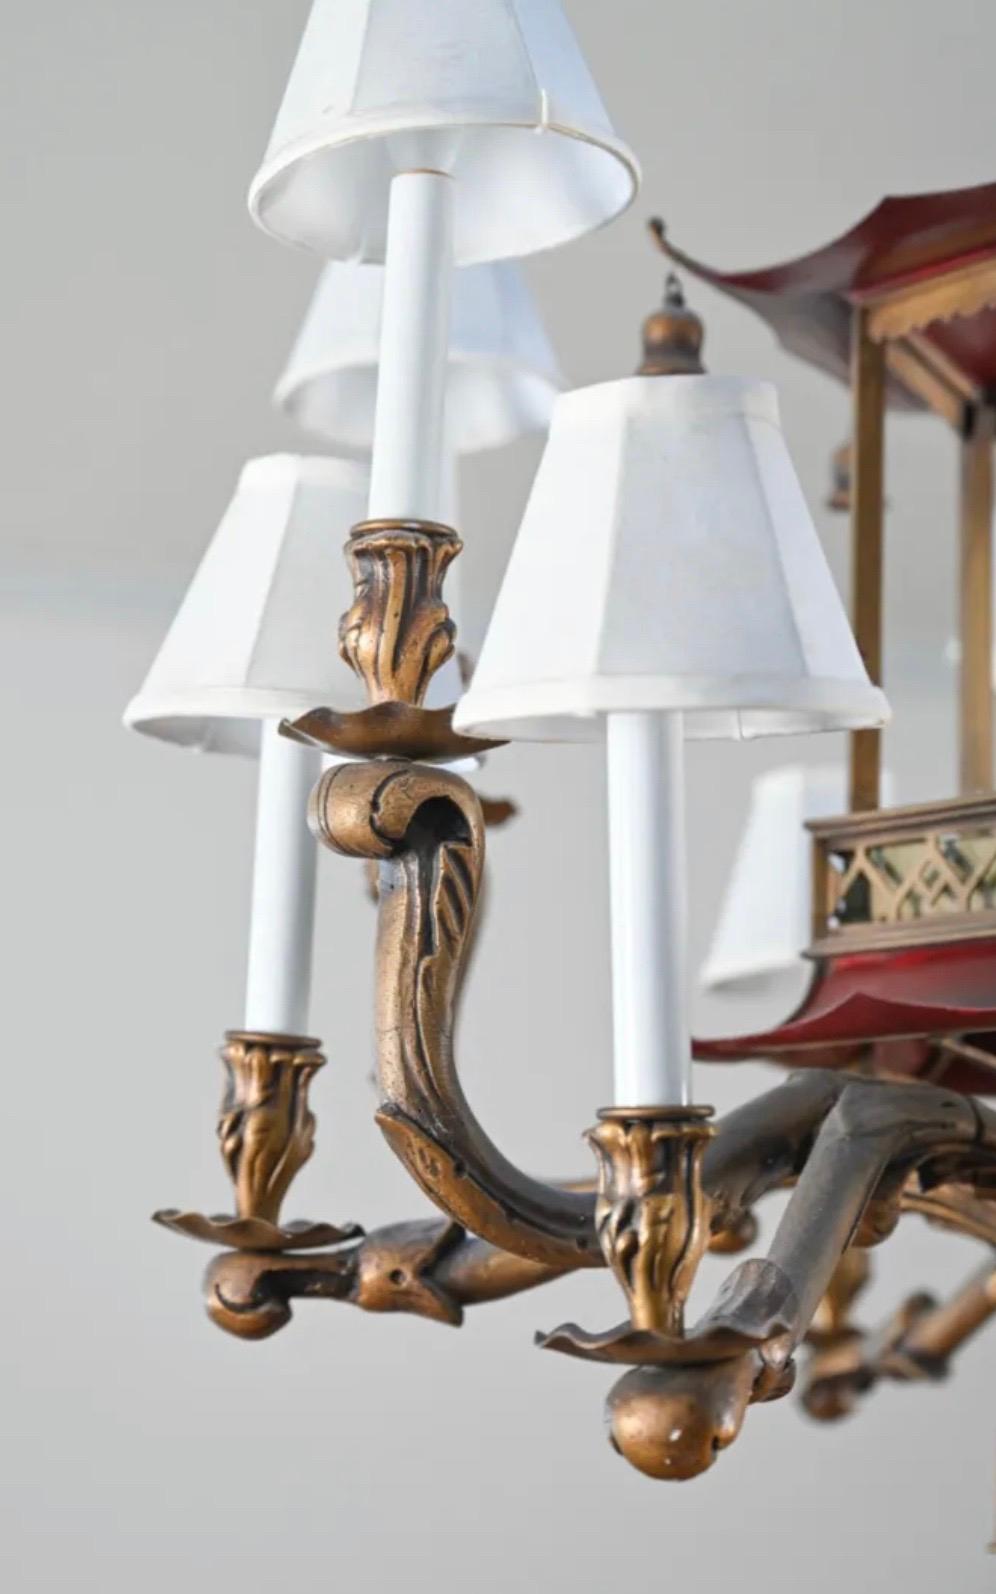 Wonderful pagoda tole red & gold painted 12 lights chandelier in Chinese Chippendale style. Dimensions: Height 33